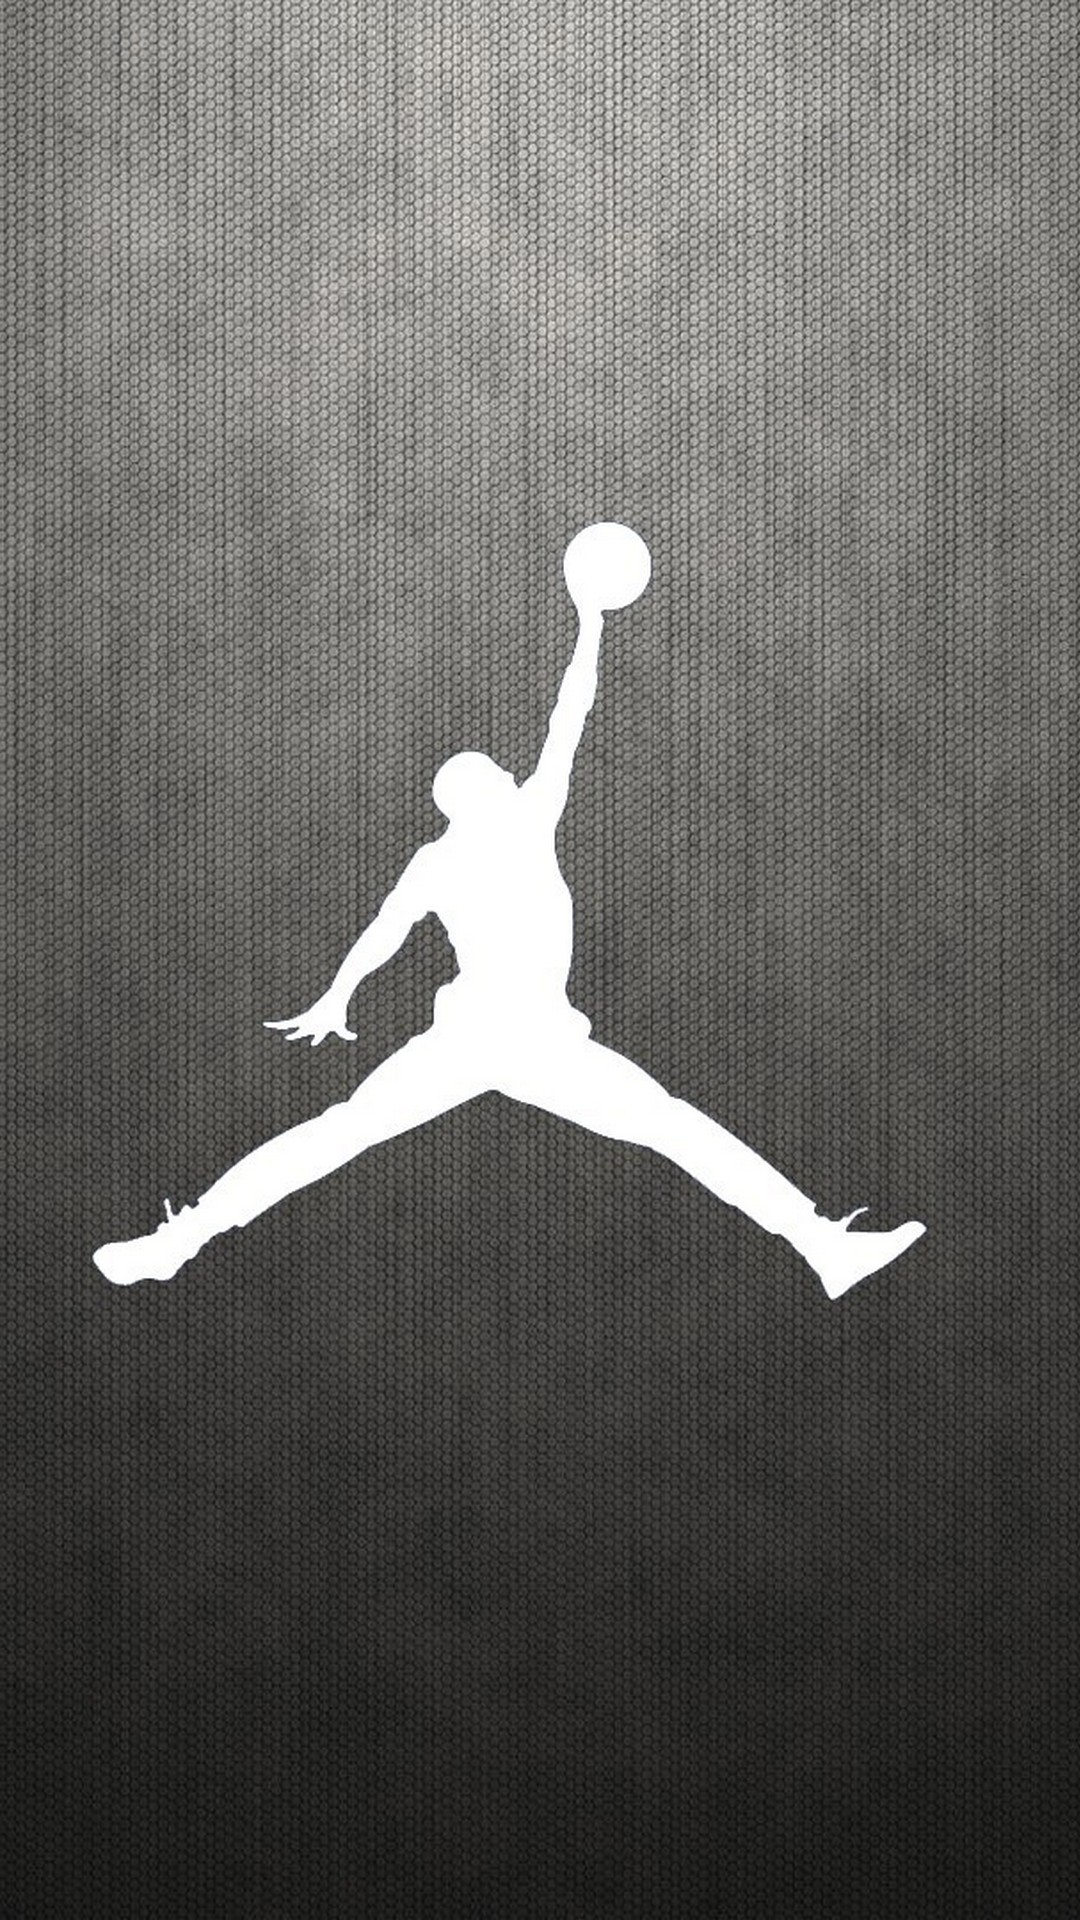 iPhone Wallpaper HD NBA with image dimensions 1080x1920 pixel. You can make this wallpaper for your Desktop Computer Backgrounds, Windows or Mac Screensavers, iPhone Lock screen, Tablet or Android and another Mobile Phone device